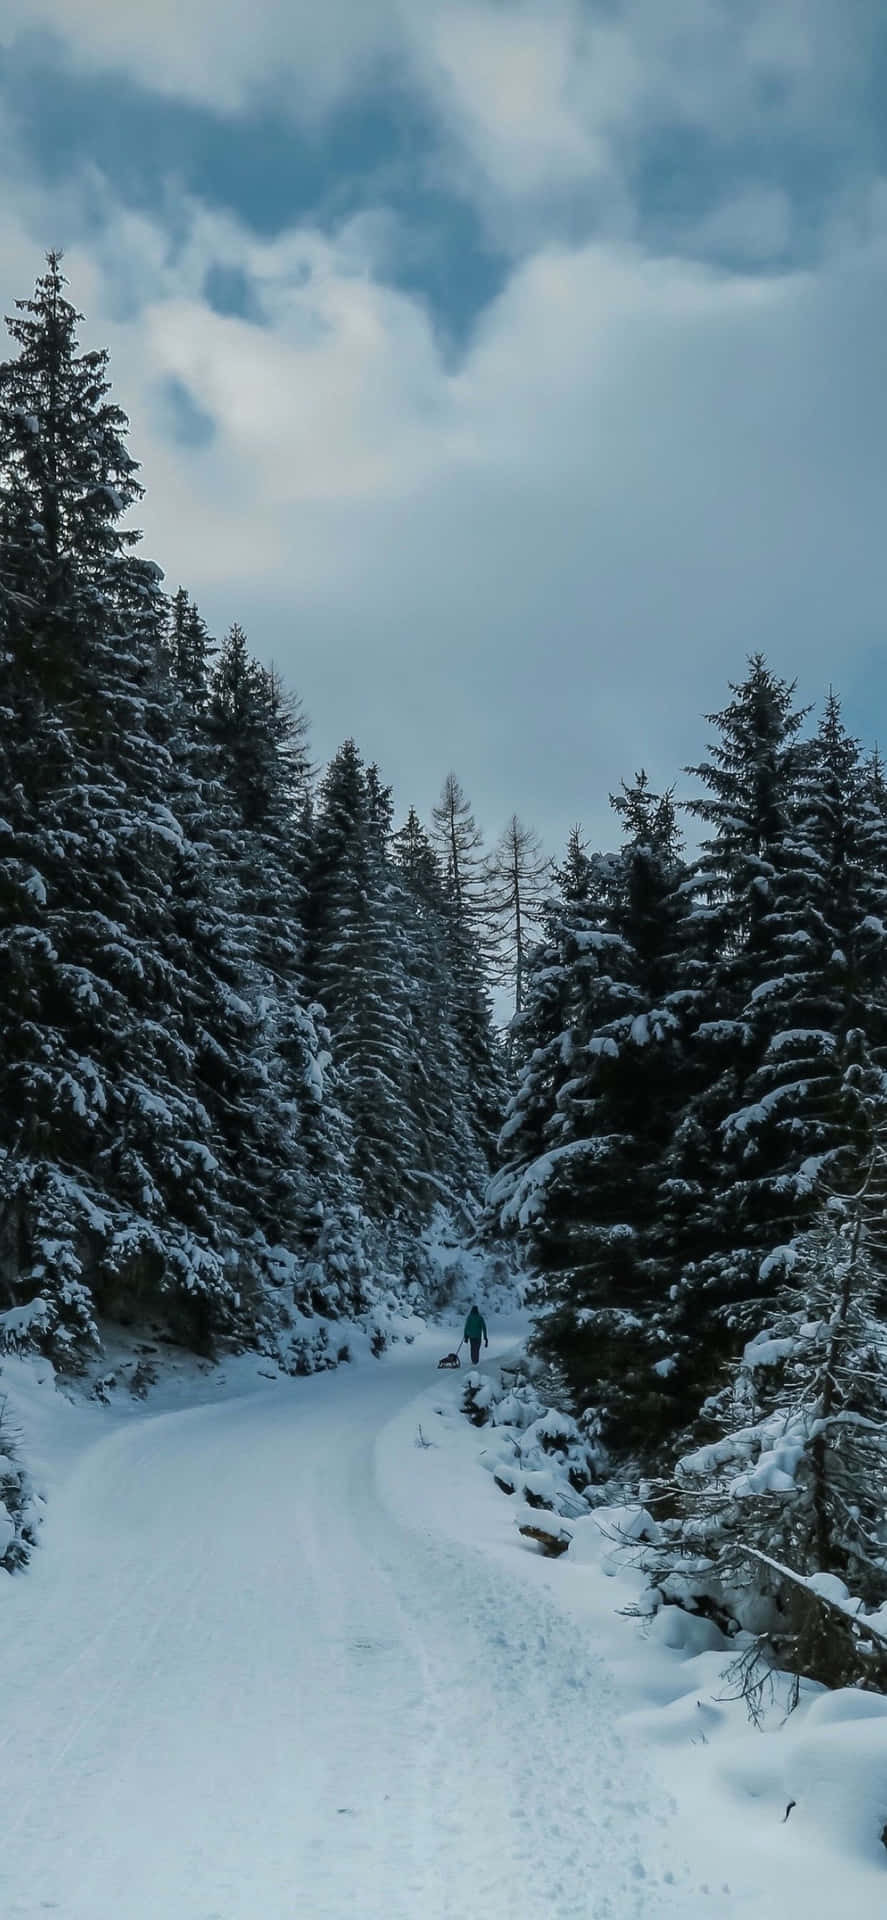 Capture beautiful memories in the snow with an iPhone Wallpaper